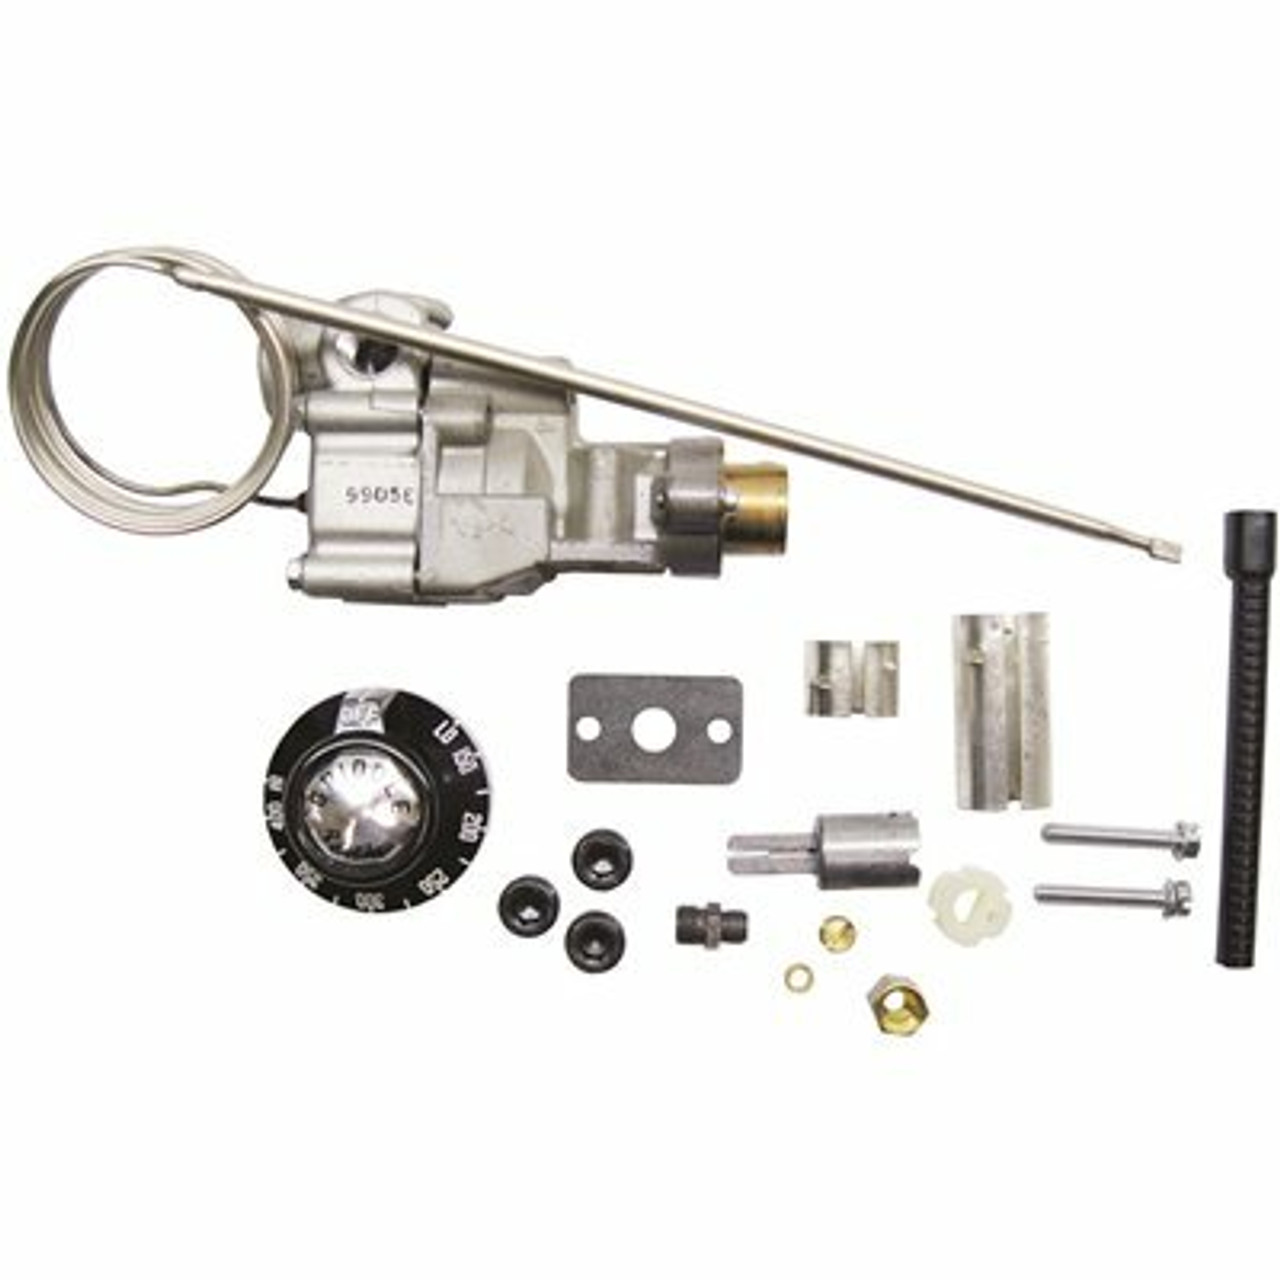 Robertshaw Gas Cooking Control Thermostat Kit For Griddles, Natural Gas / Propane, 1/4 In. Gas Connection